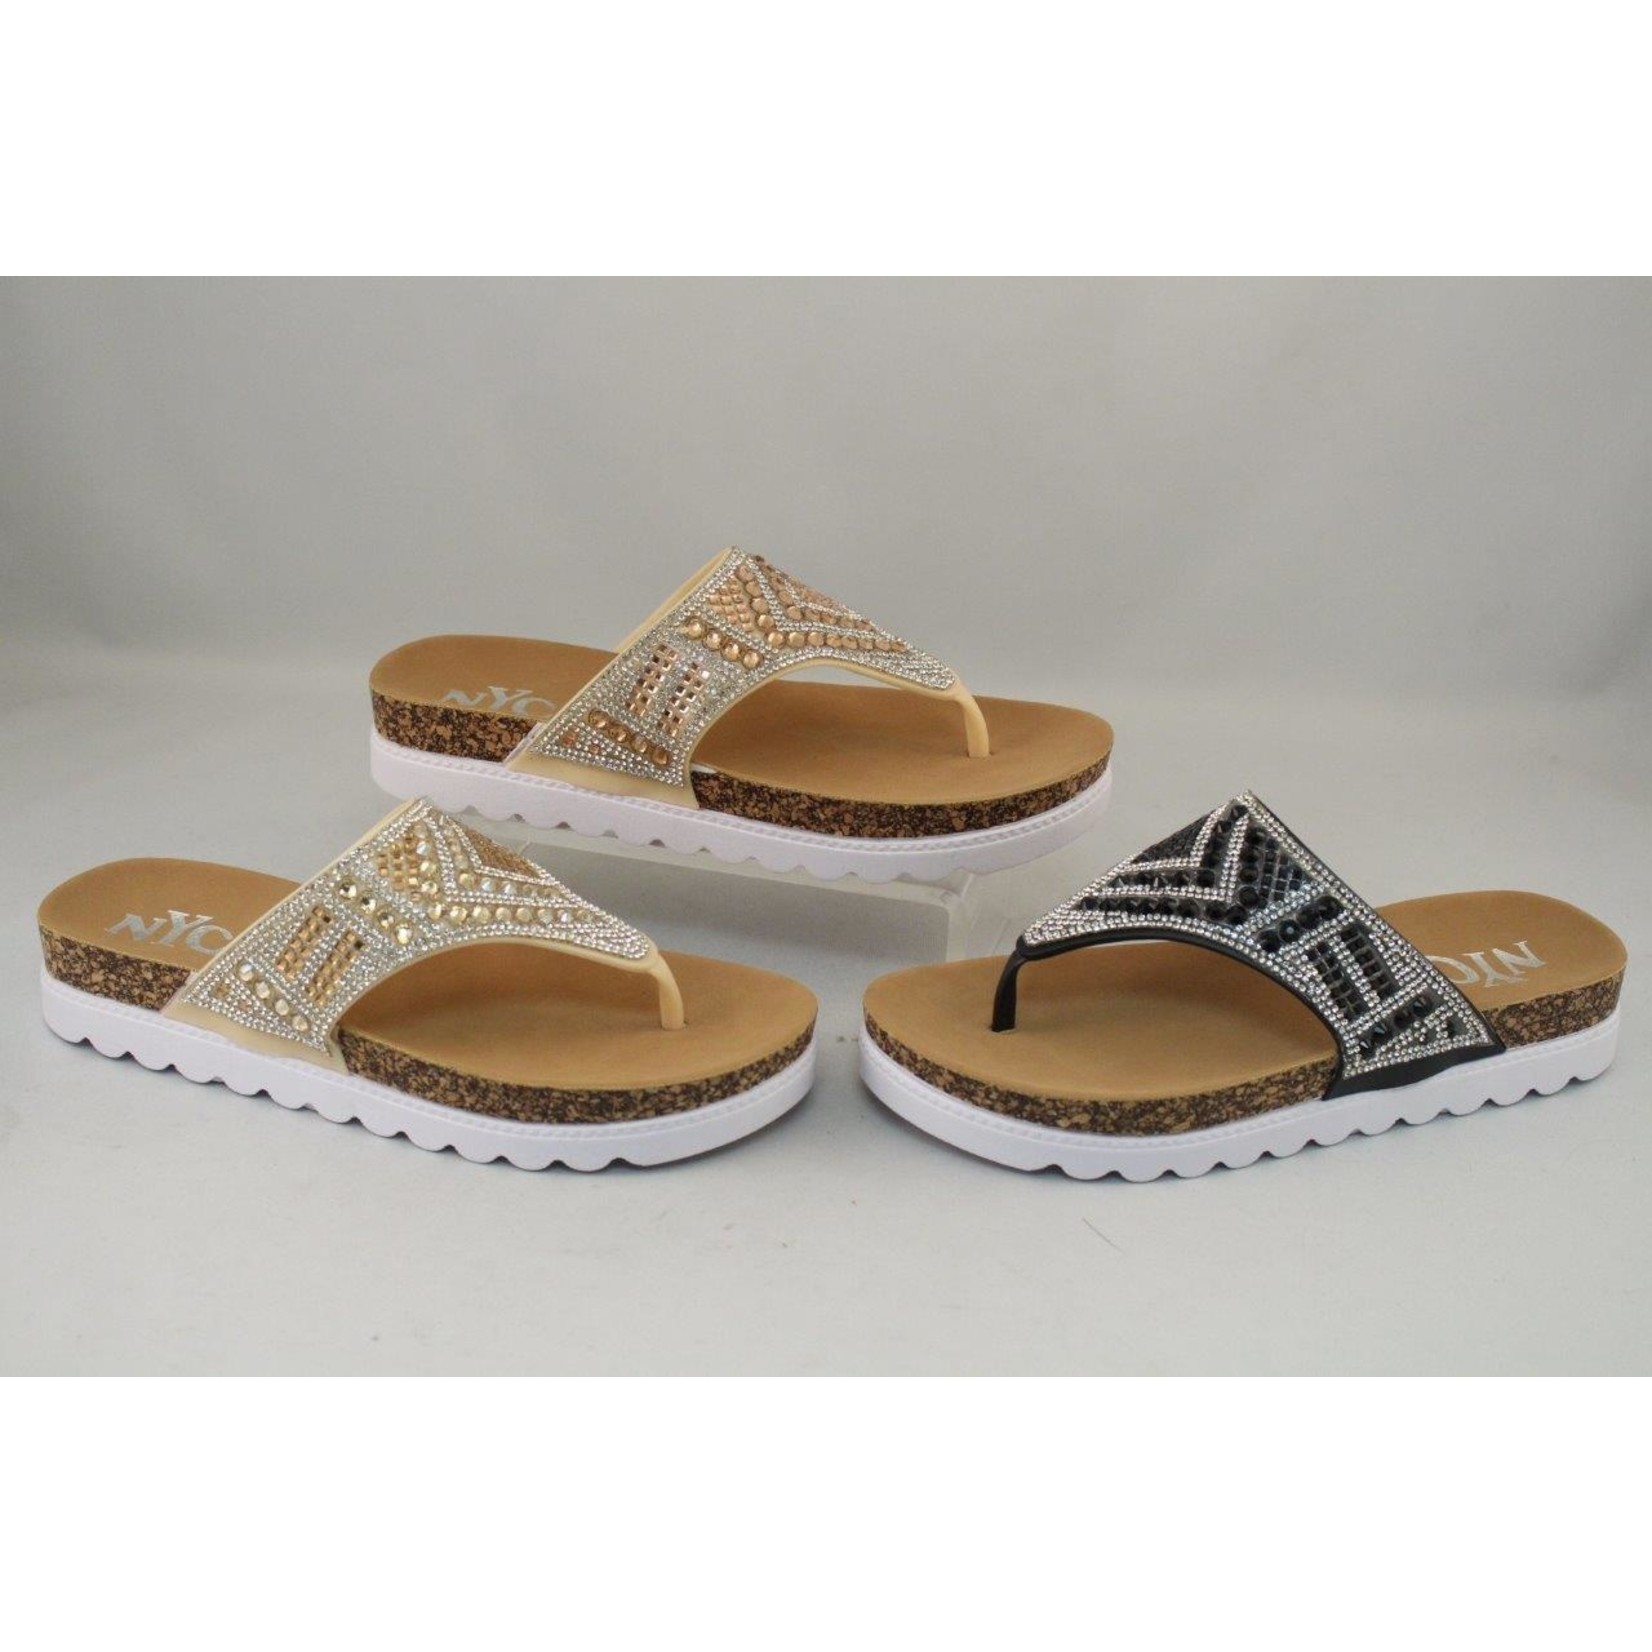 Rhinestone thong sandal, Only available in Black and Gold